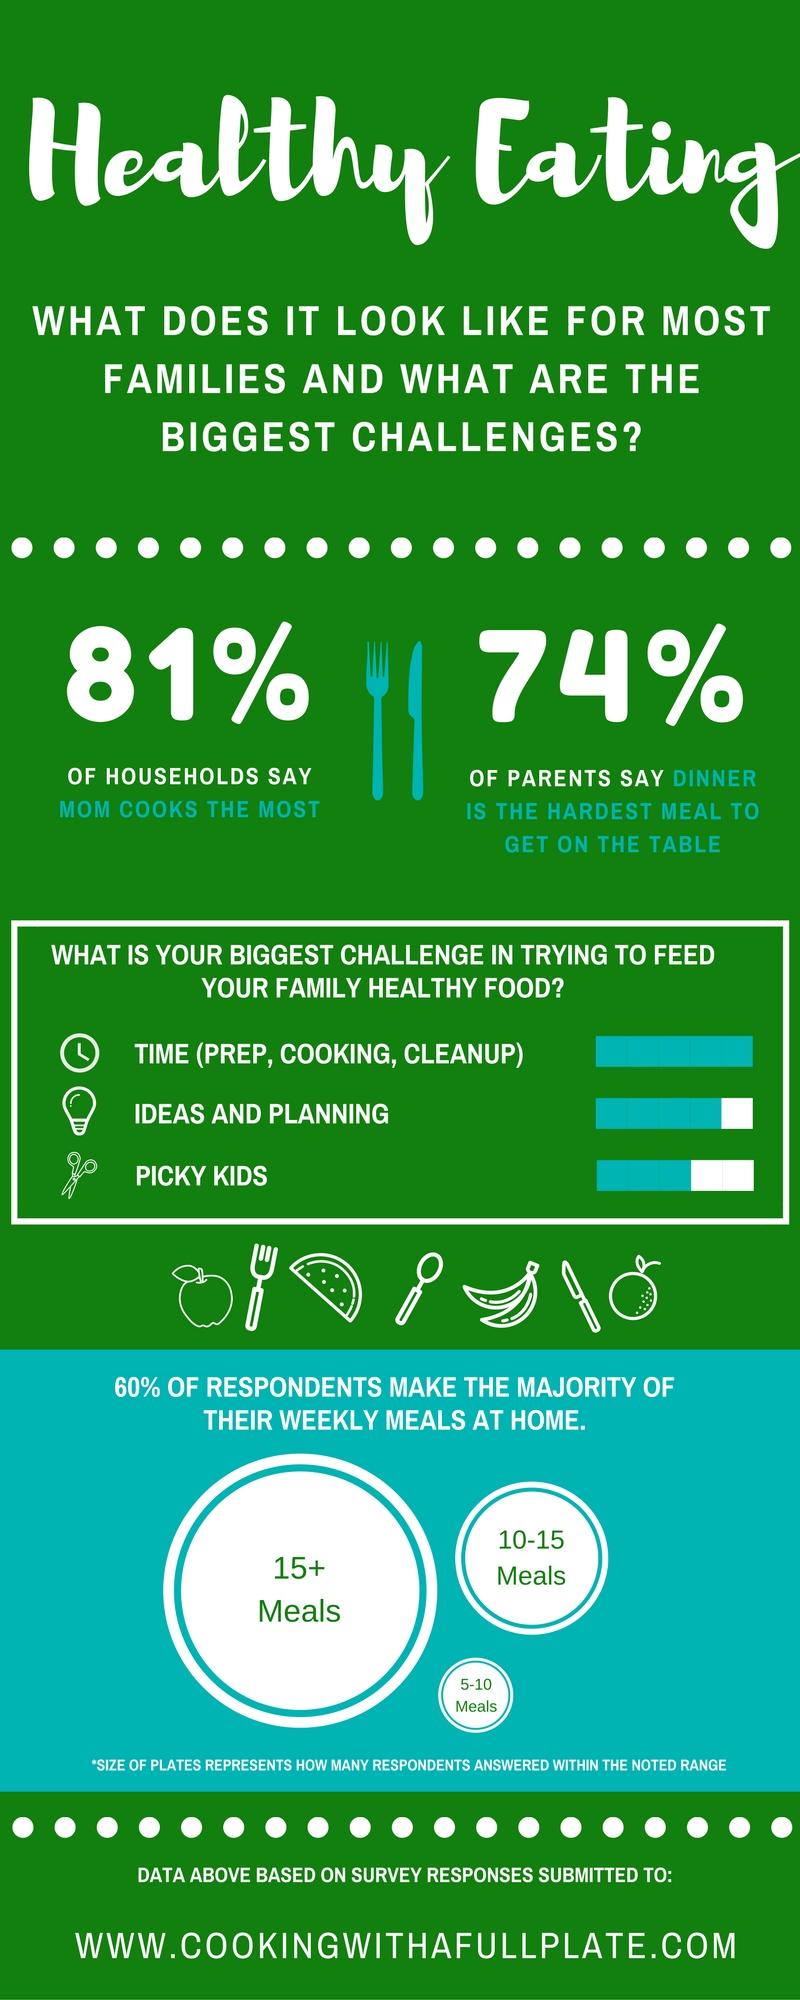 Find out more about what your fellow parents struggle with when it comes to healthy eating at home. You're not along in thinking it's awfully hard to raise kids and cook healthy food. Click through to see how I can help!